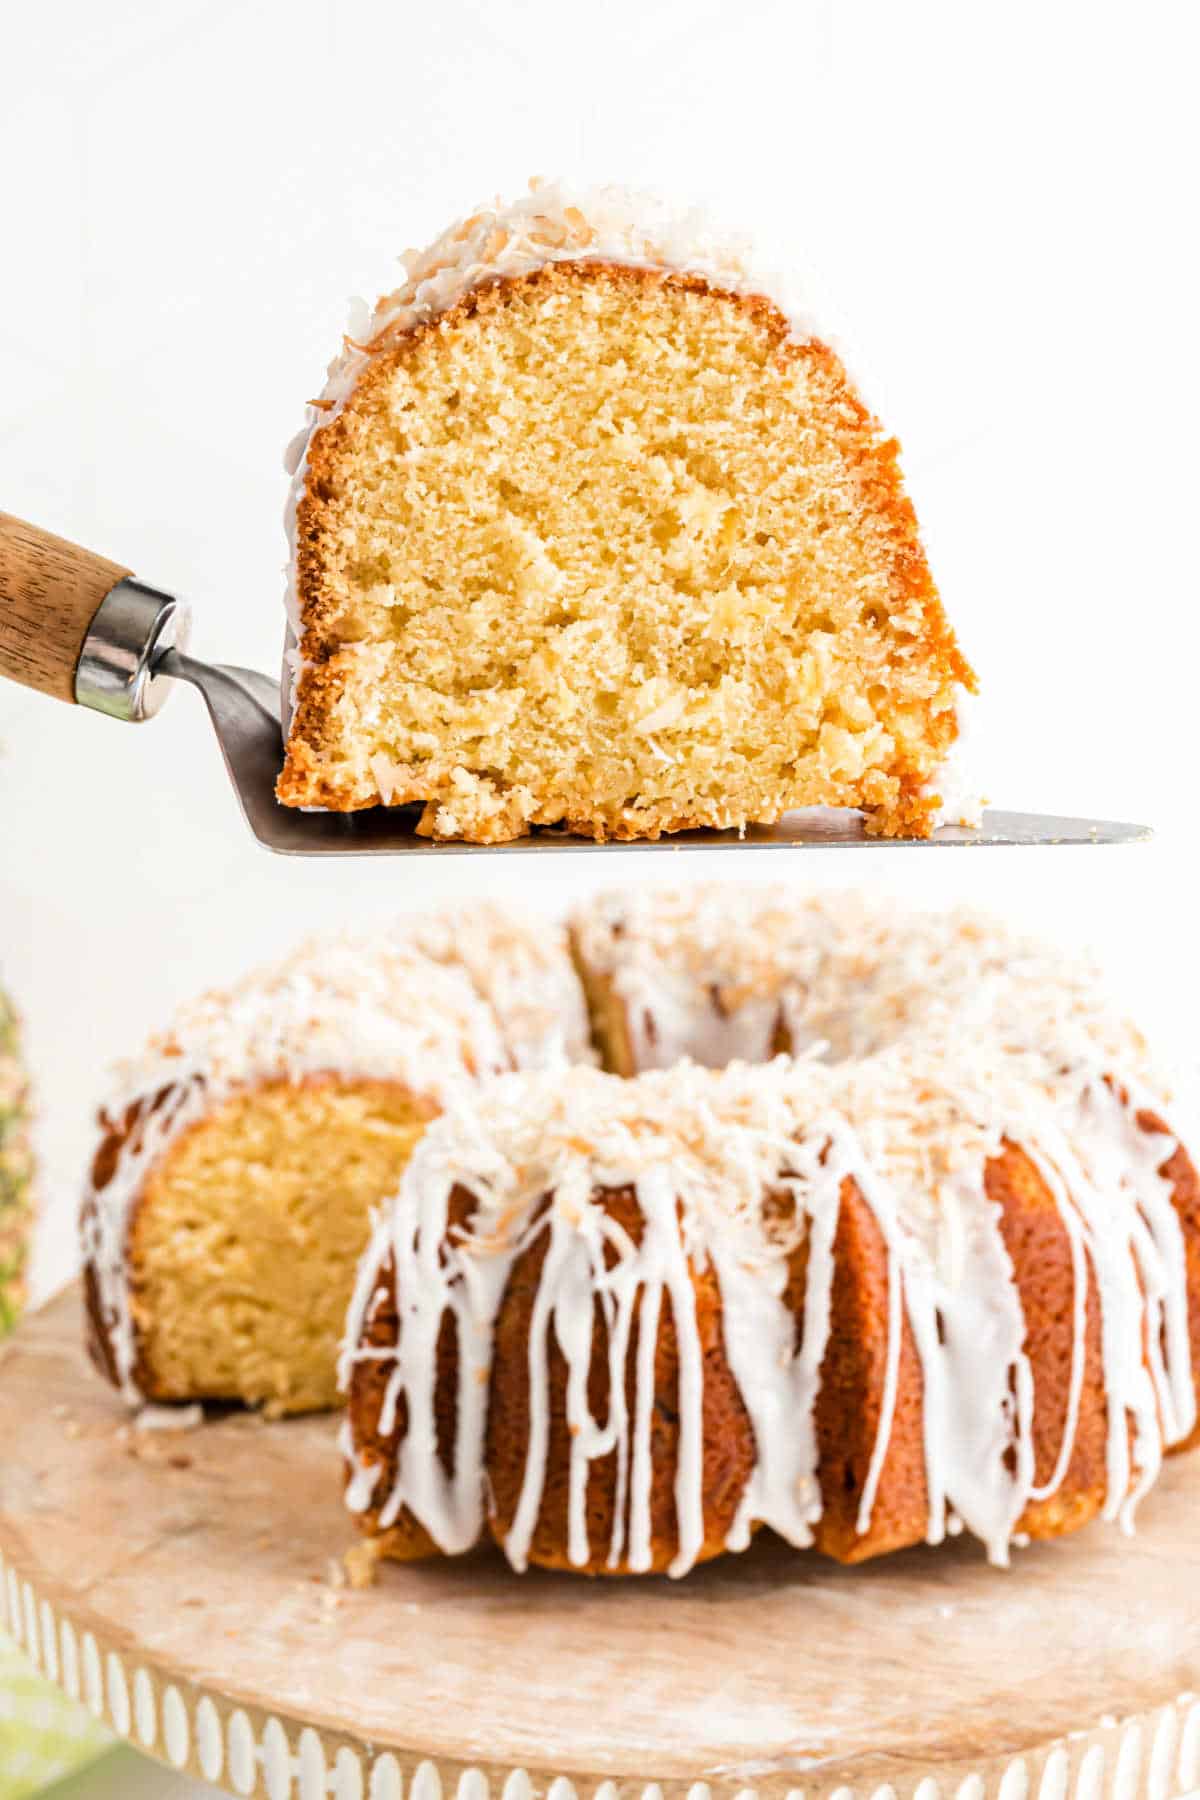 Slice of pineapple pound cake being lifted with a spatula.